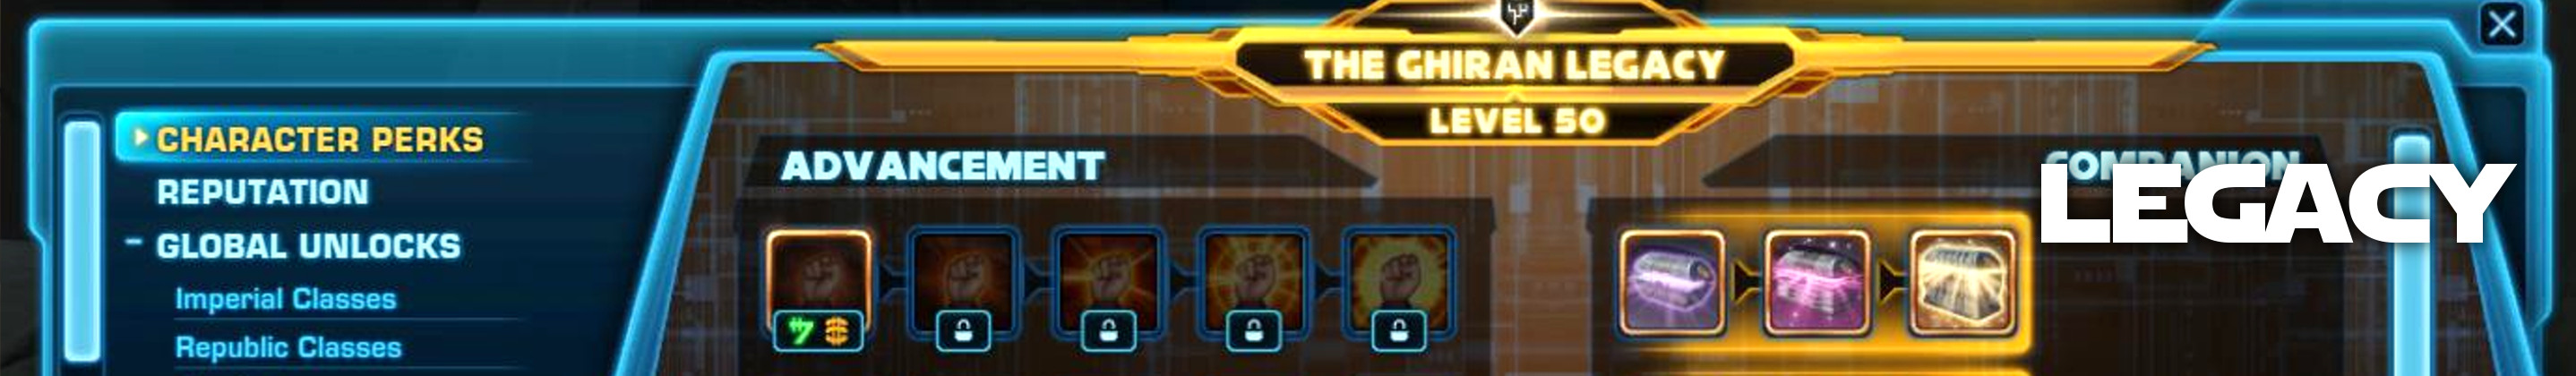 Your SWTOR Legacy with Unlocks/Buffs